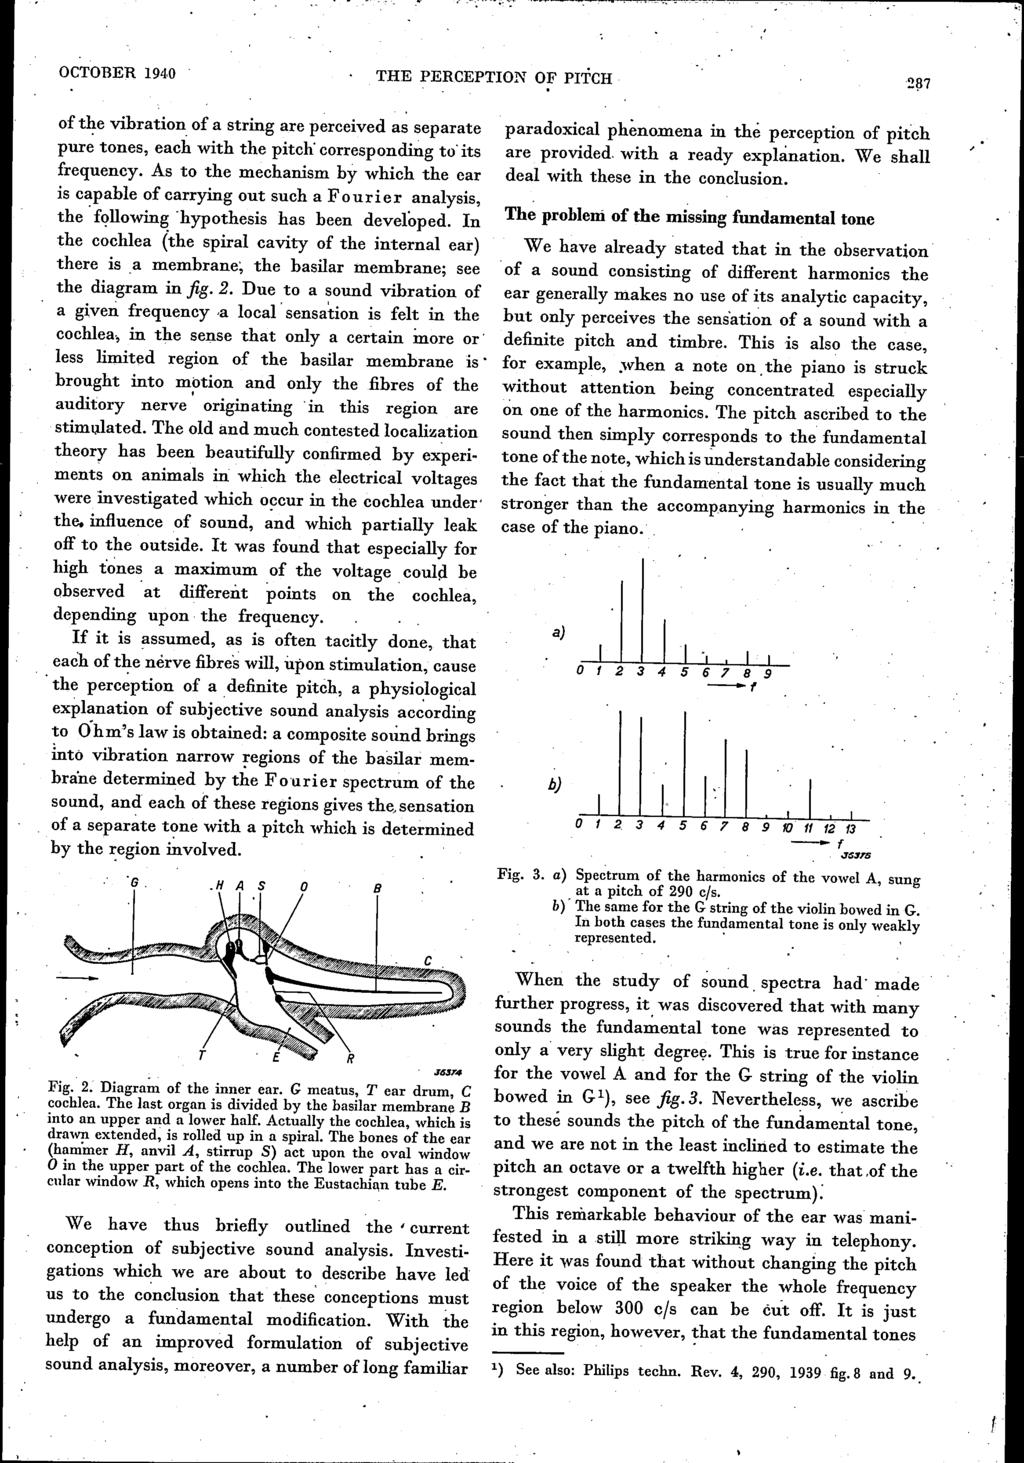 " OCTOBER 194,0 THE PERCEPTION OF PITCH of the vibration of a string are perceived as separate pure tones, each with the pitch' corresponding to' its frequency.